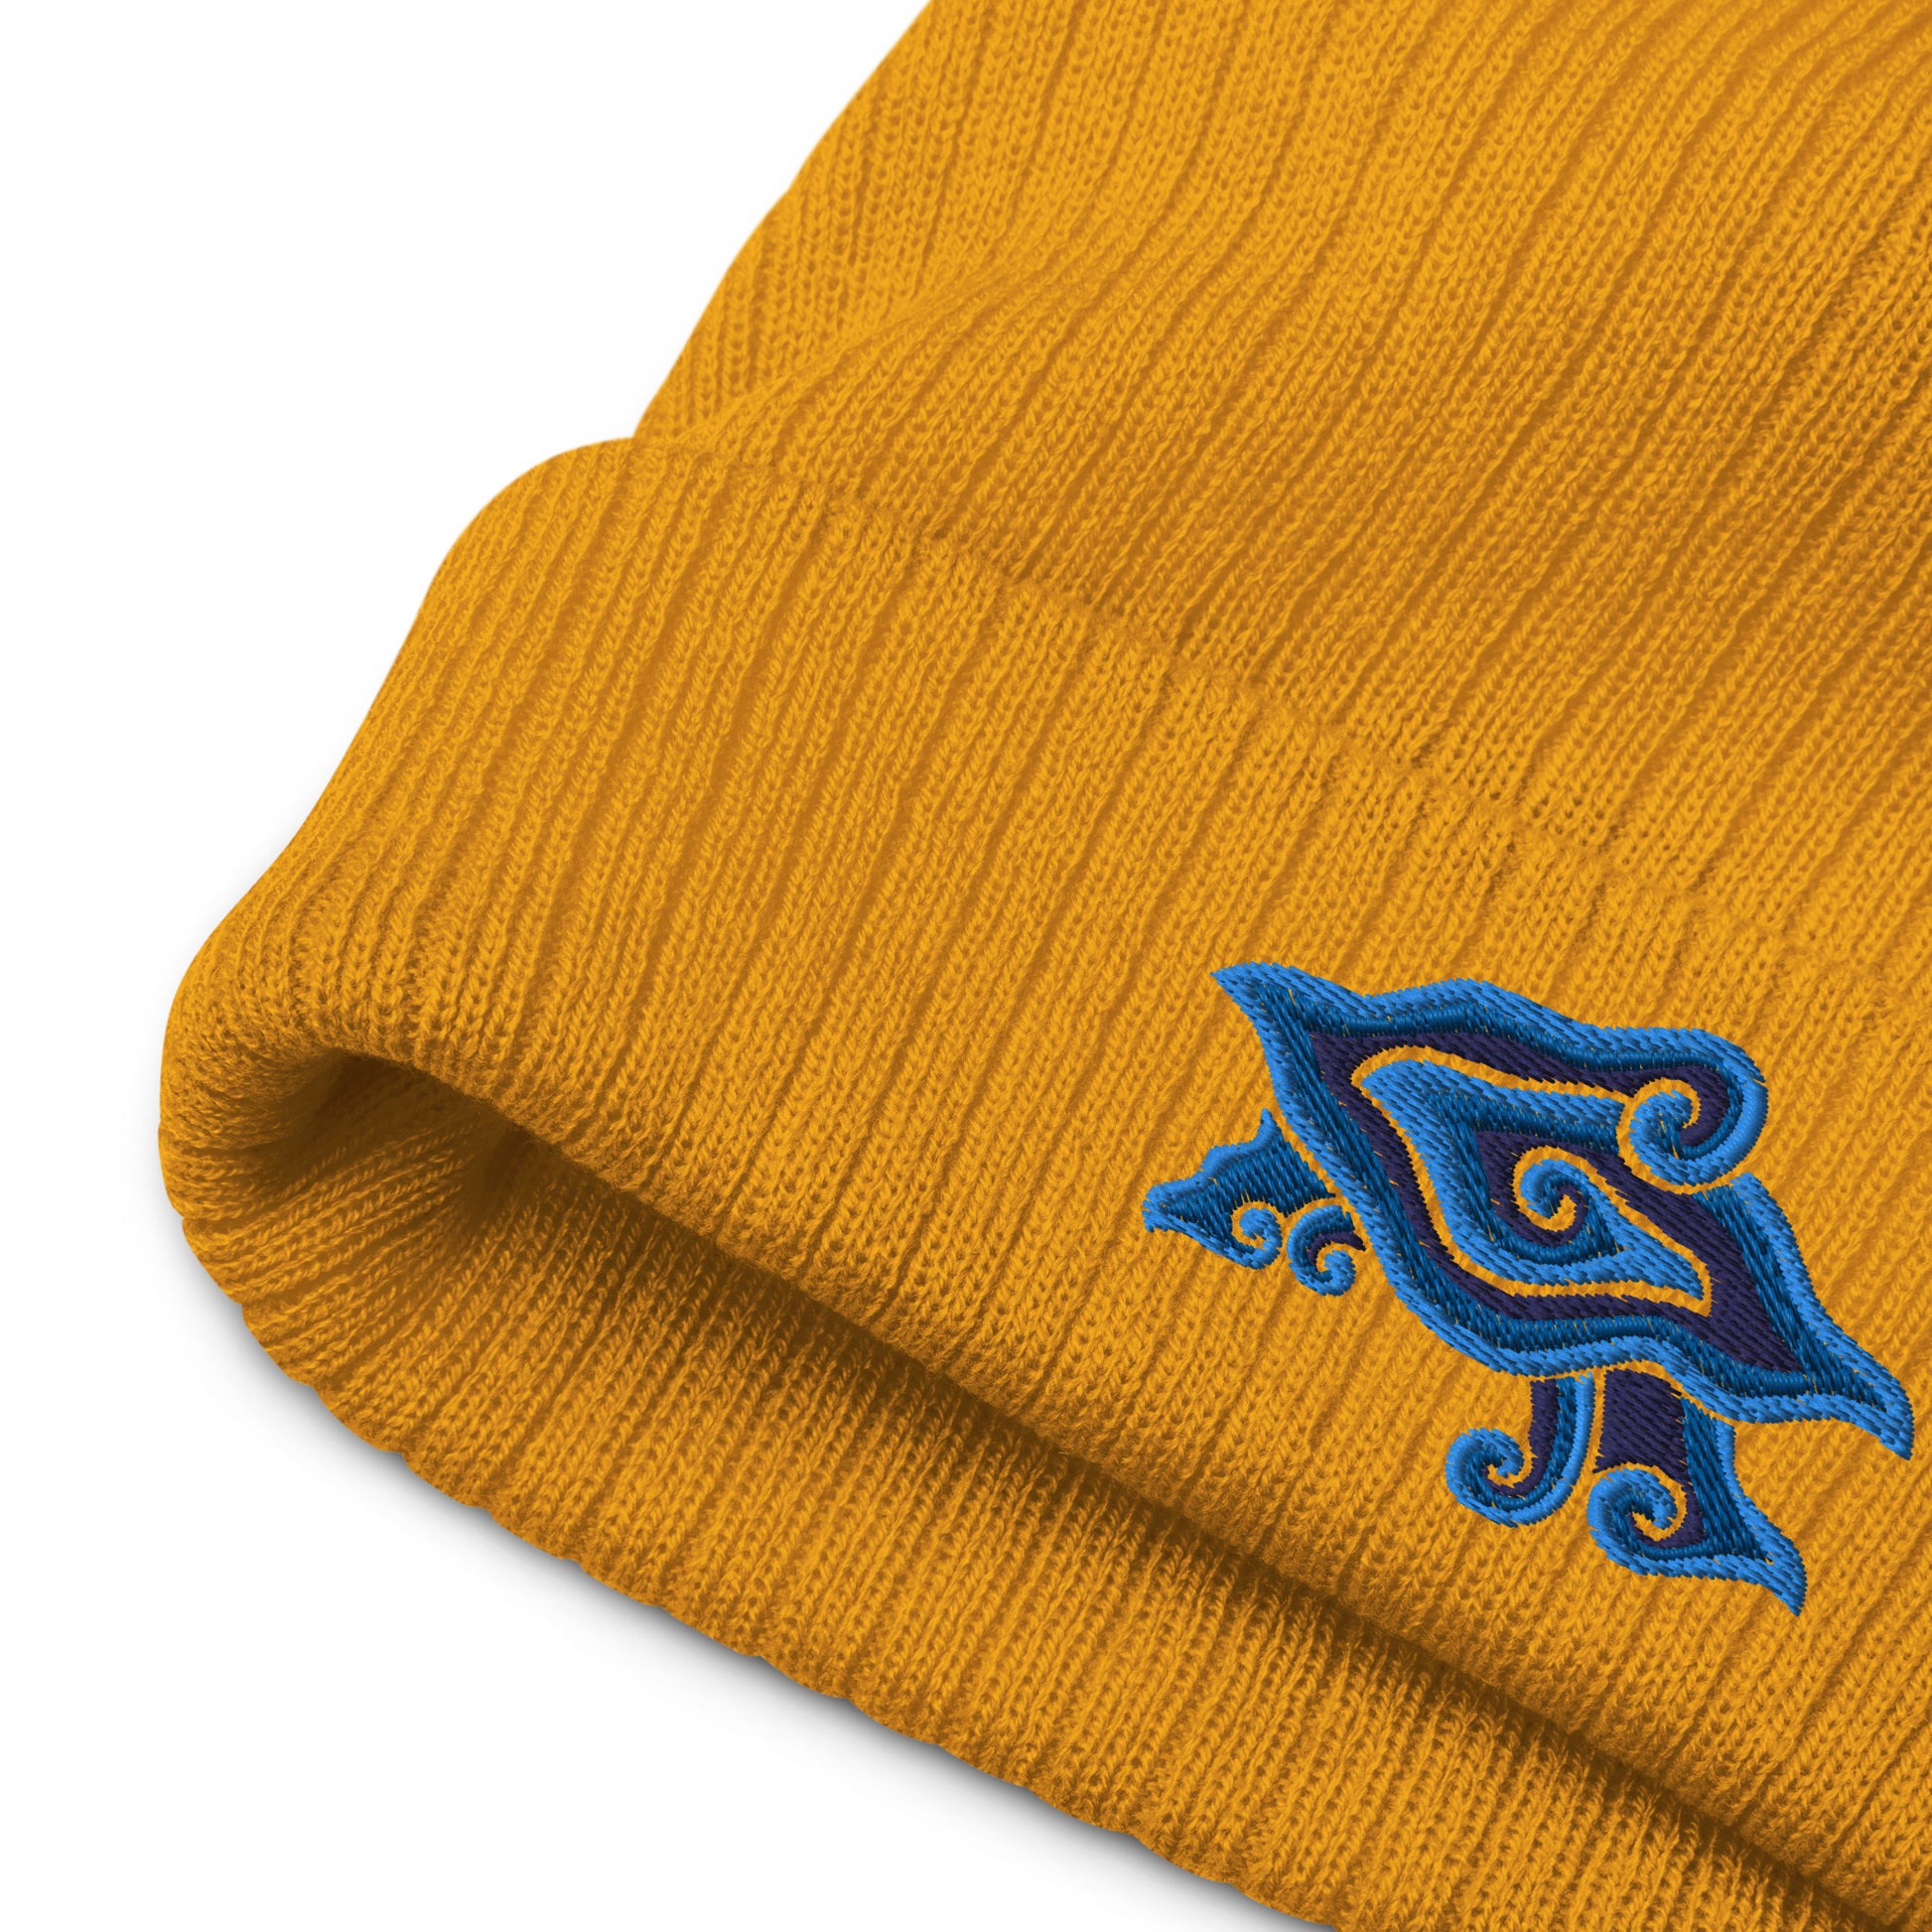 Indonesian Mendung Embroidered Beanie - The Global Wanderer